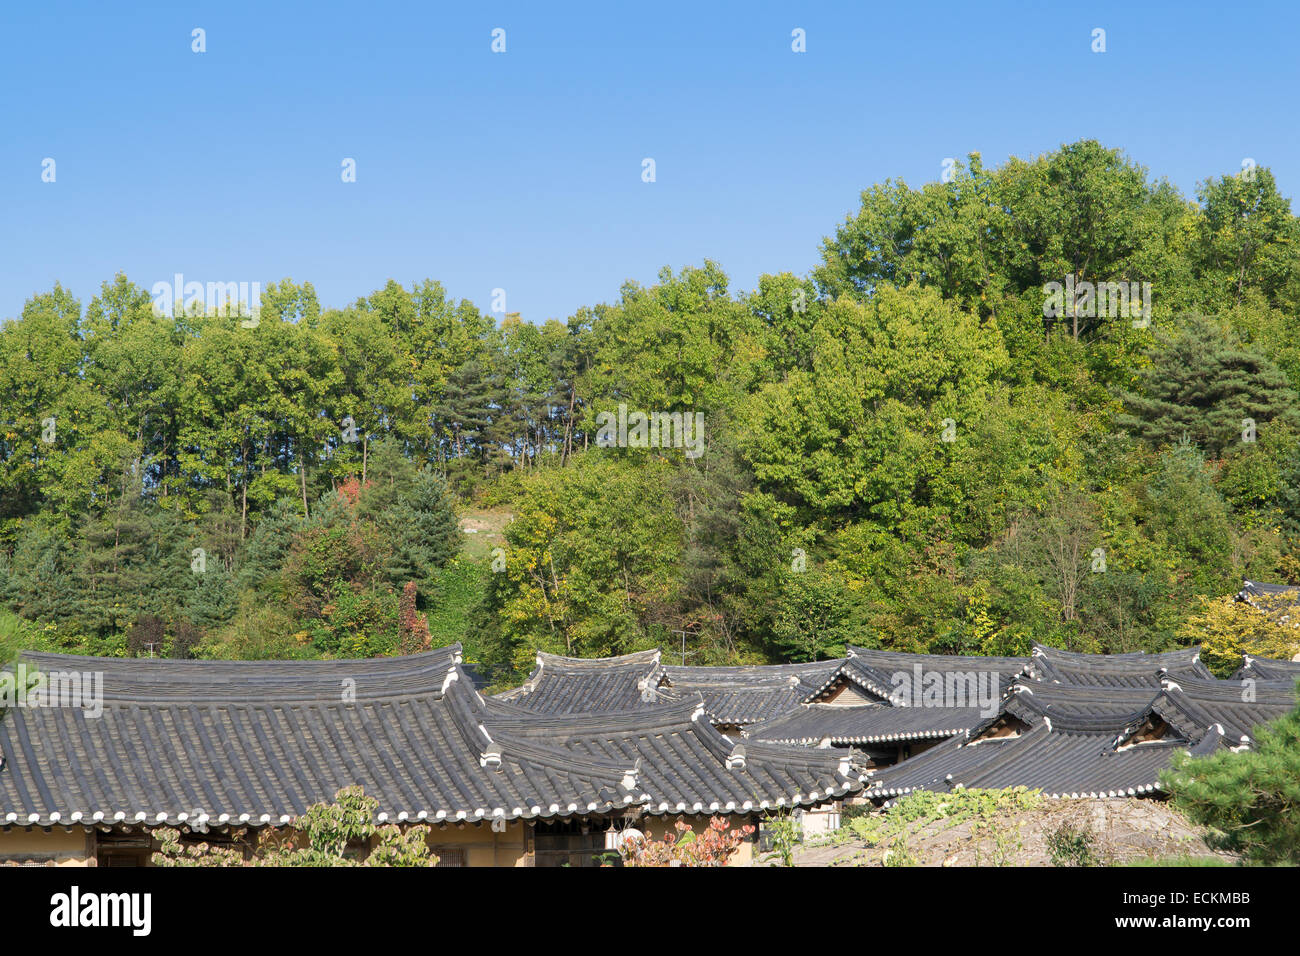 tiled roof of Korean traditional Architecture in a village Stock Photo